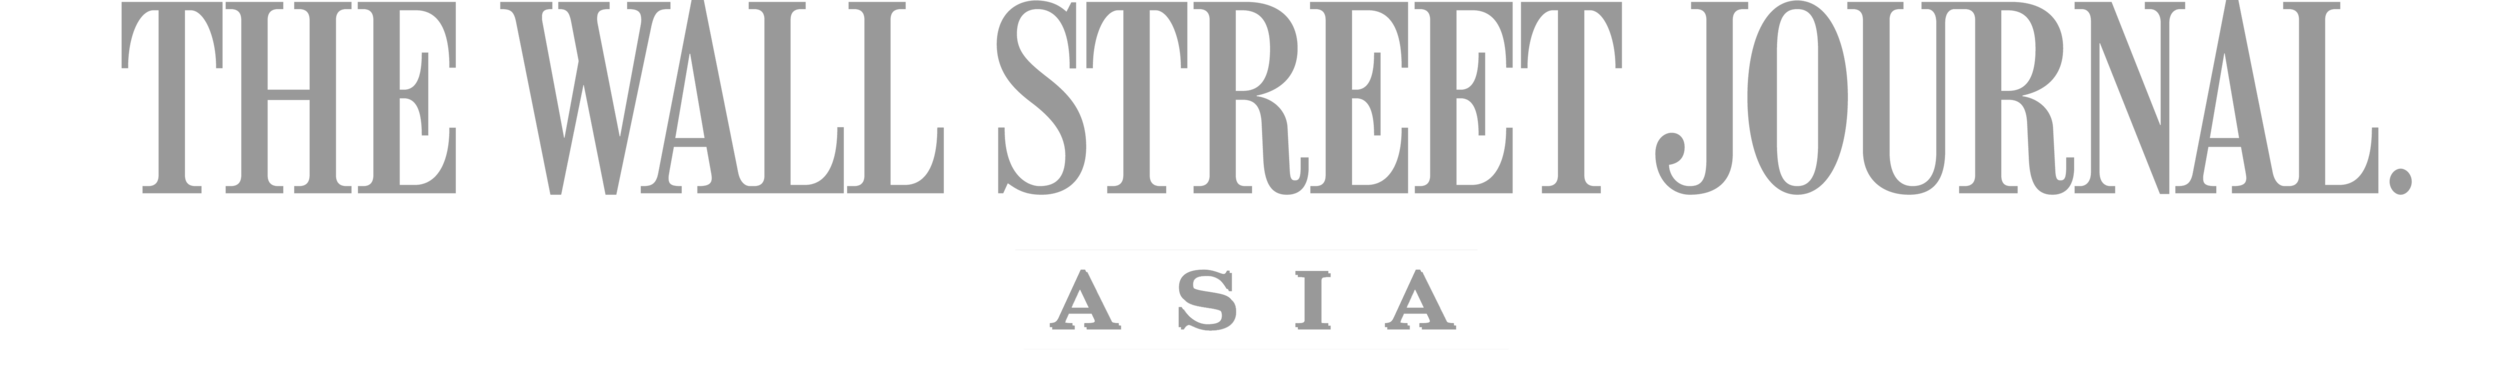 The_Wall_Street_Journal_Asia_logobw.png